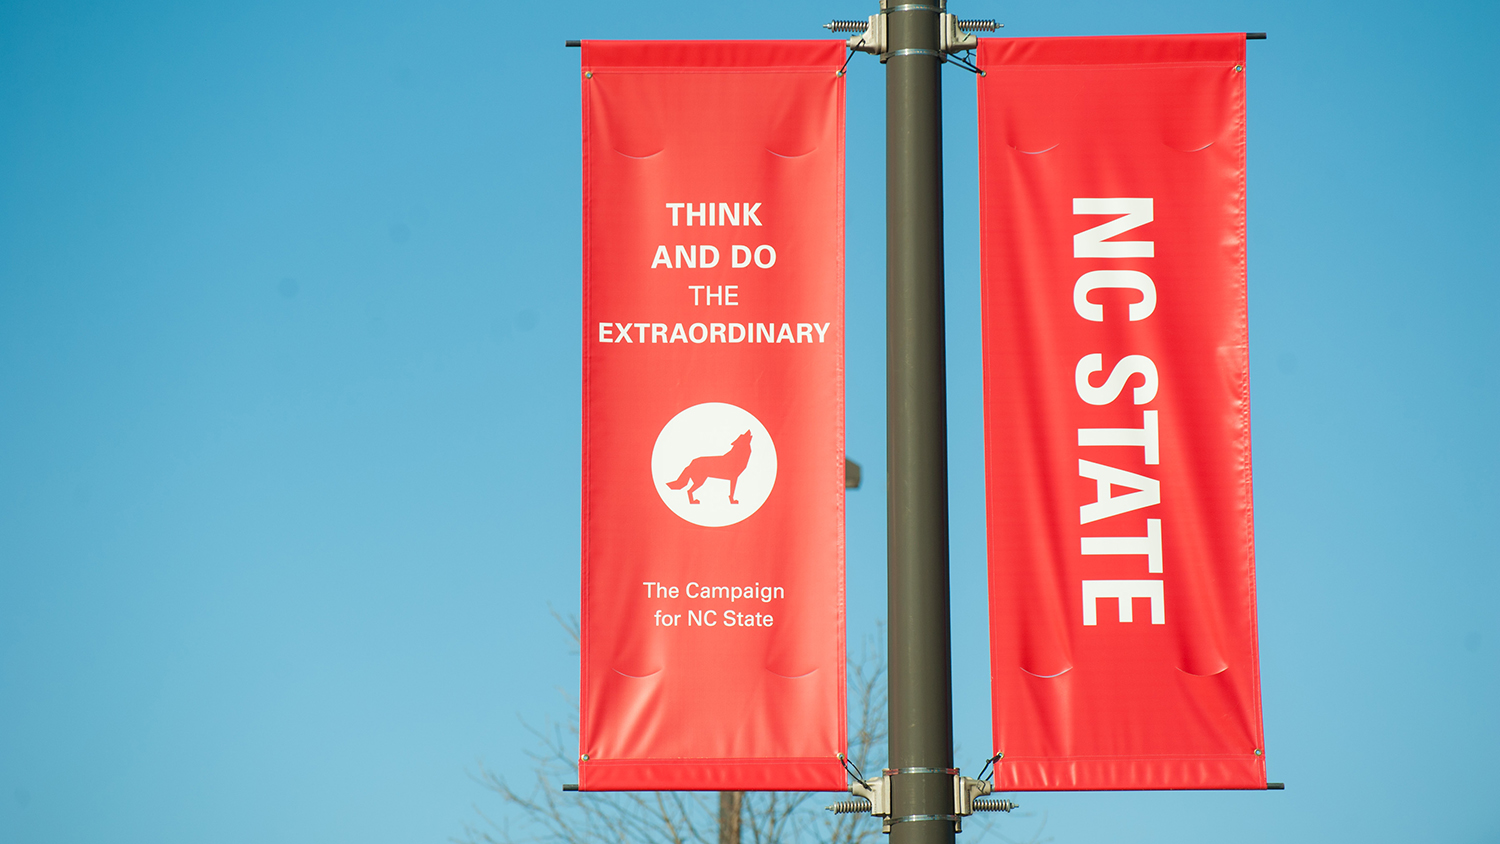 Think and Do banners